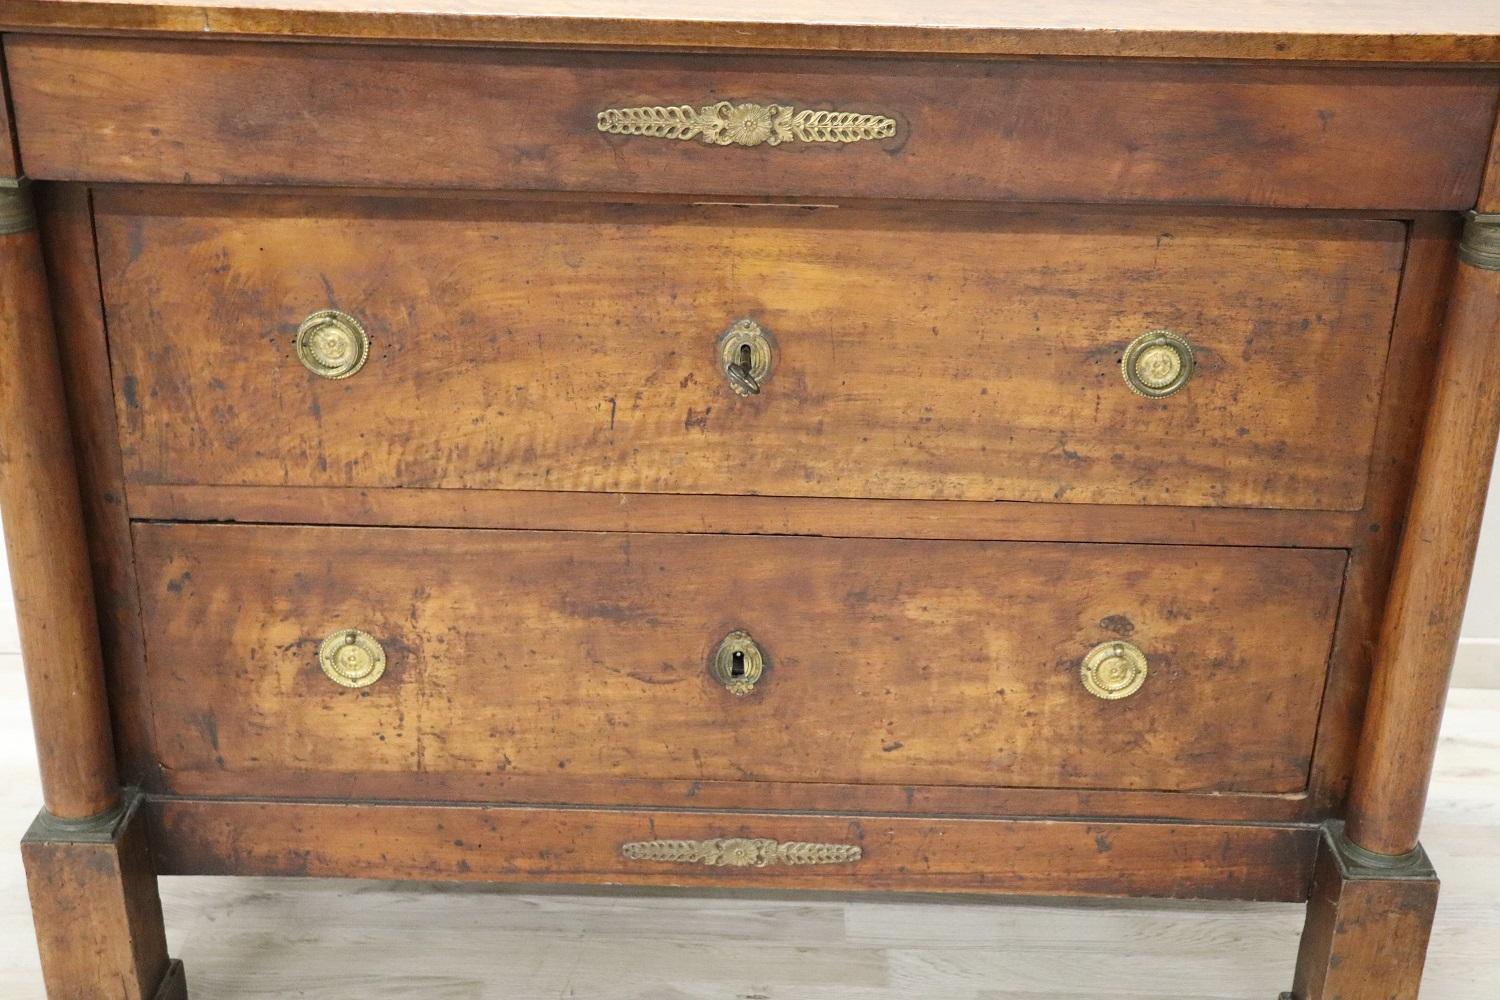 Important antique Italian chest of drawers 1800s in solid walnut wood. The commode is very refined linear and elegant. On the front two large decorative columns. Precious decorations in finely chiselled gilded bronze. Equipped with three comfortable